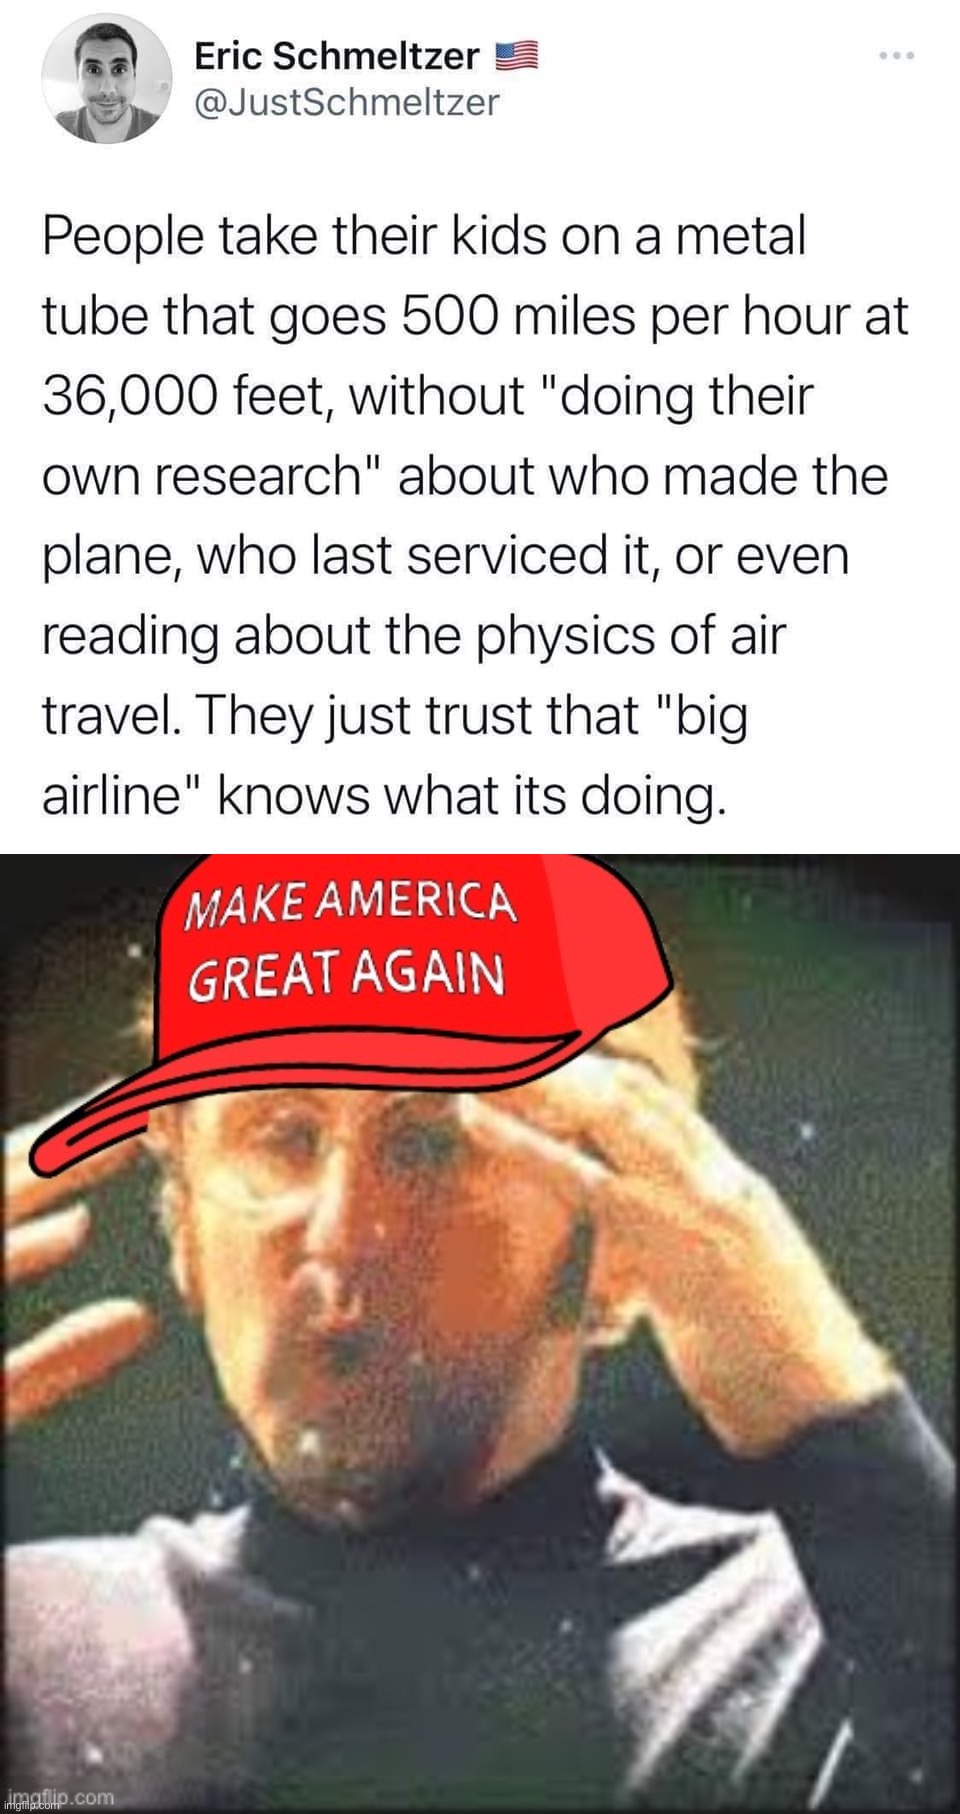 He’s never flying again | image tagged in big airline,maga mind blown,mind blown,antivax,anti-vaxx,conservative logic | made w/ Imgflip meme maker